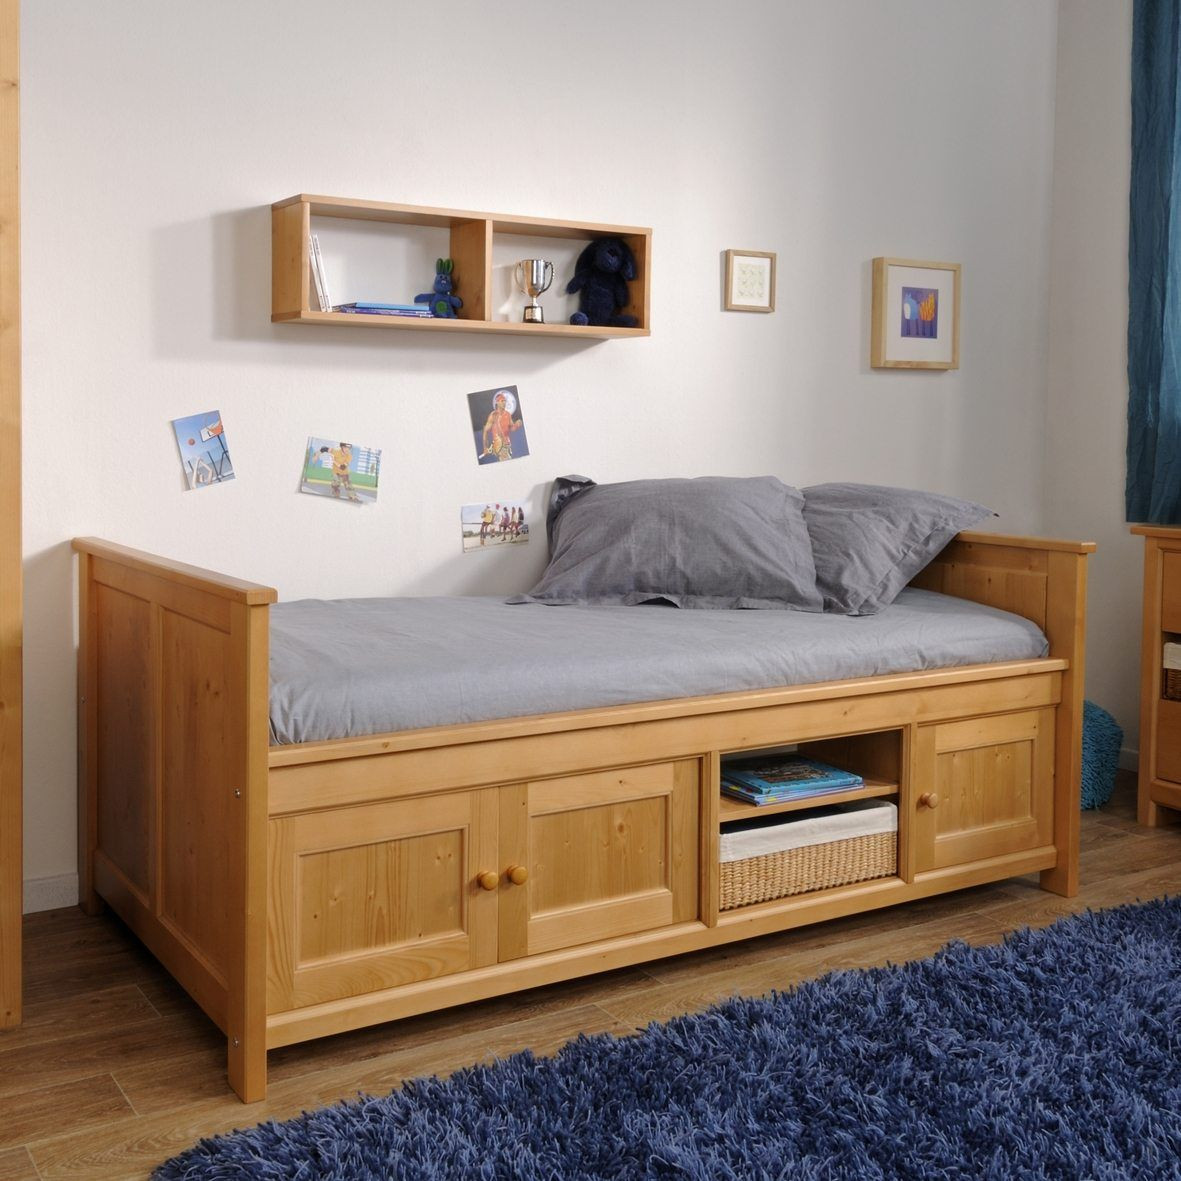 Child Bed With Storage
 Kids Solid Pine Bed Frame Under Bed Storage Kids Beds With